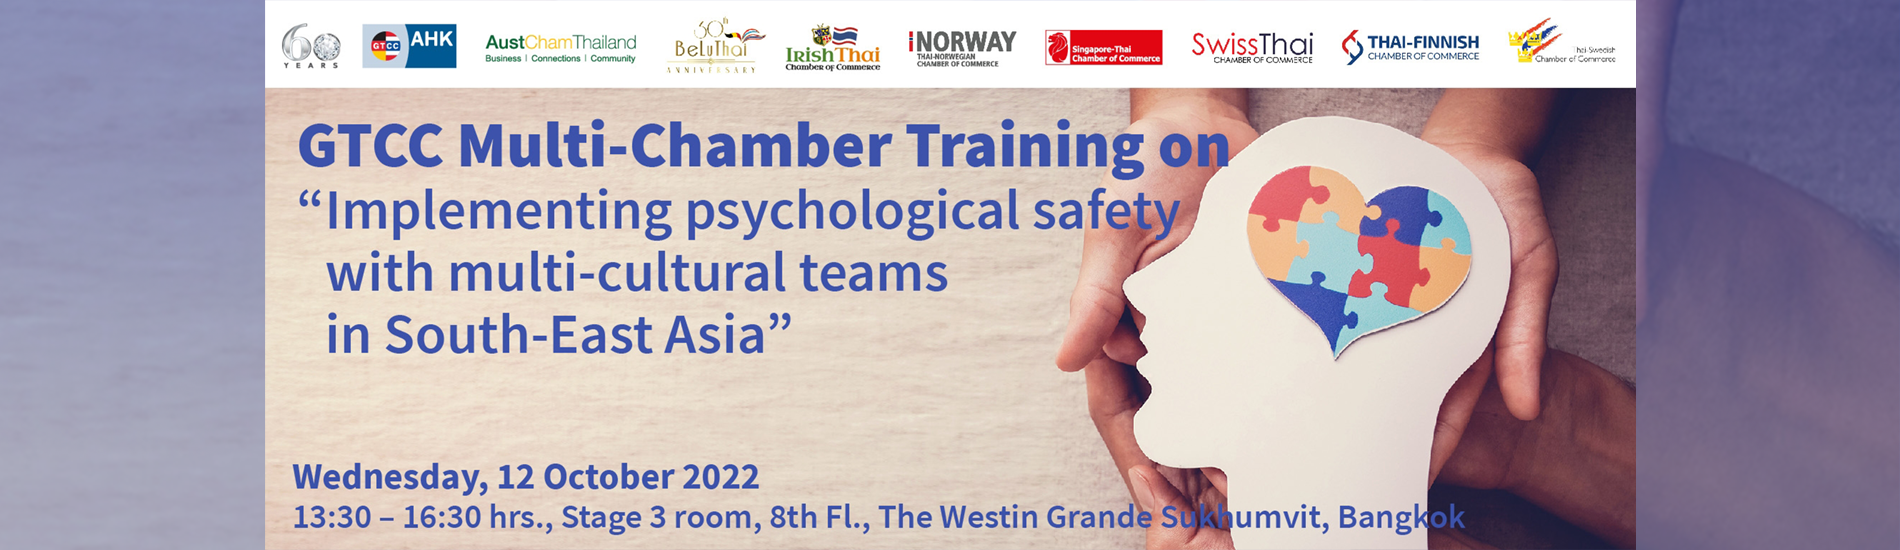 GTCC Multi-Chamber Training: Implementing Psychological Safety with Multi-Cultural Teams in South-East Asia